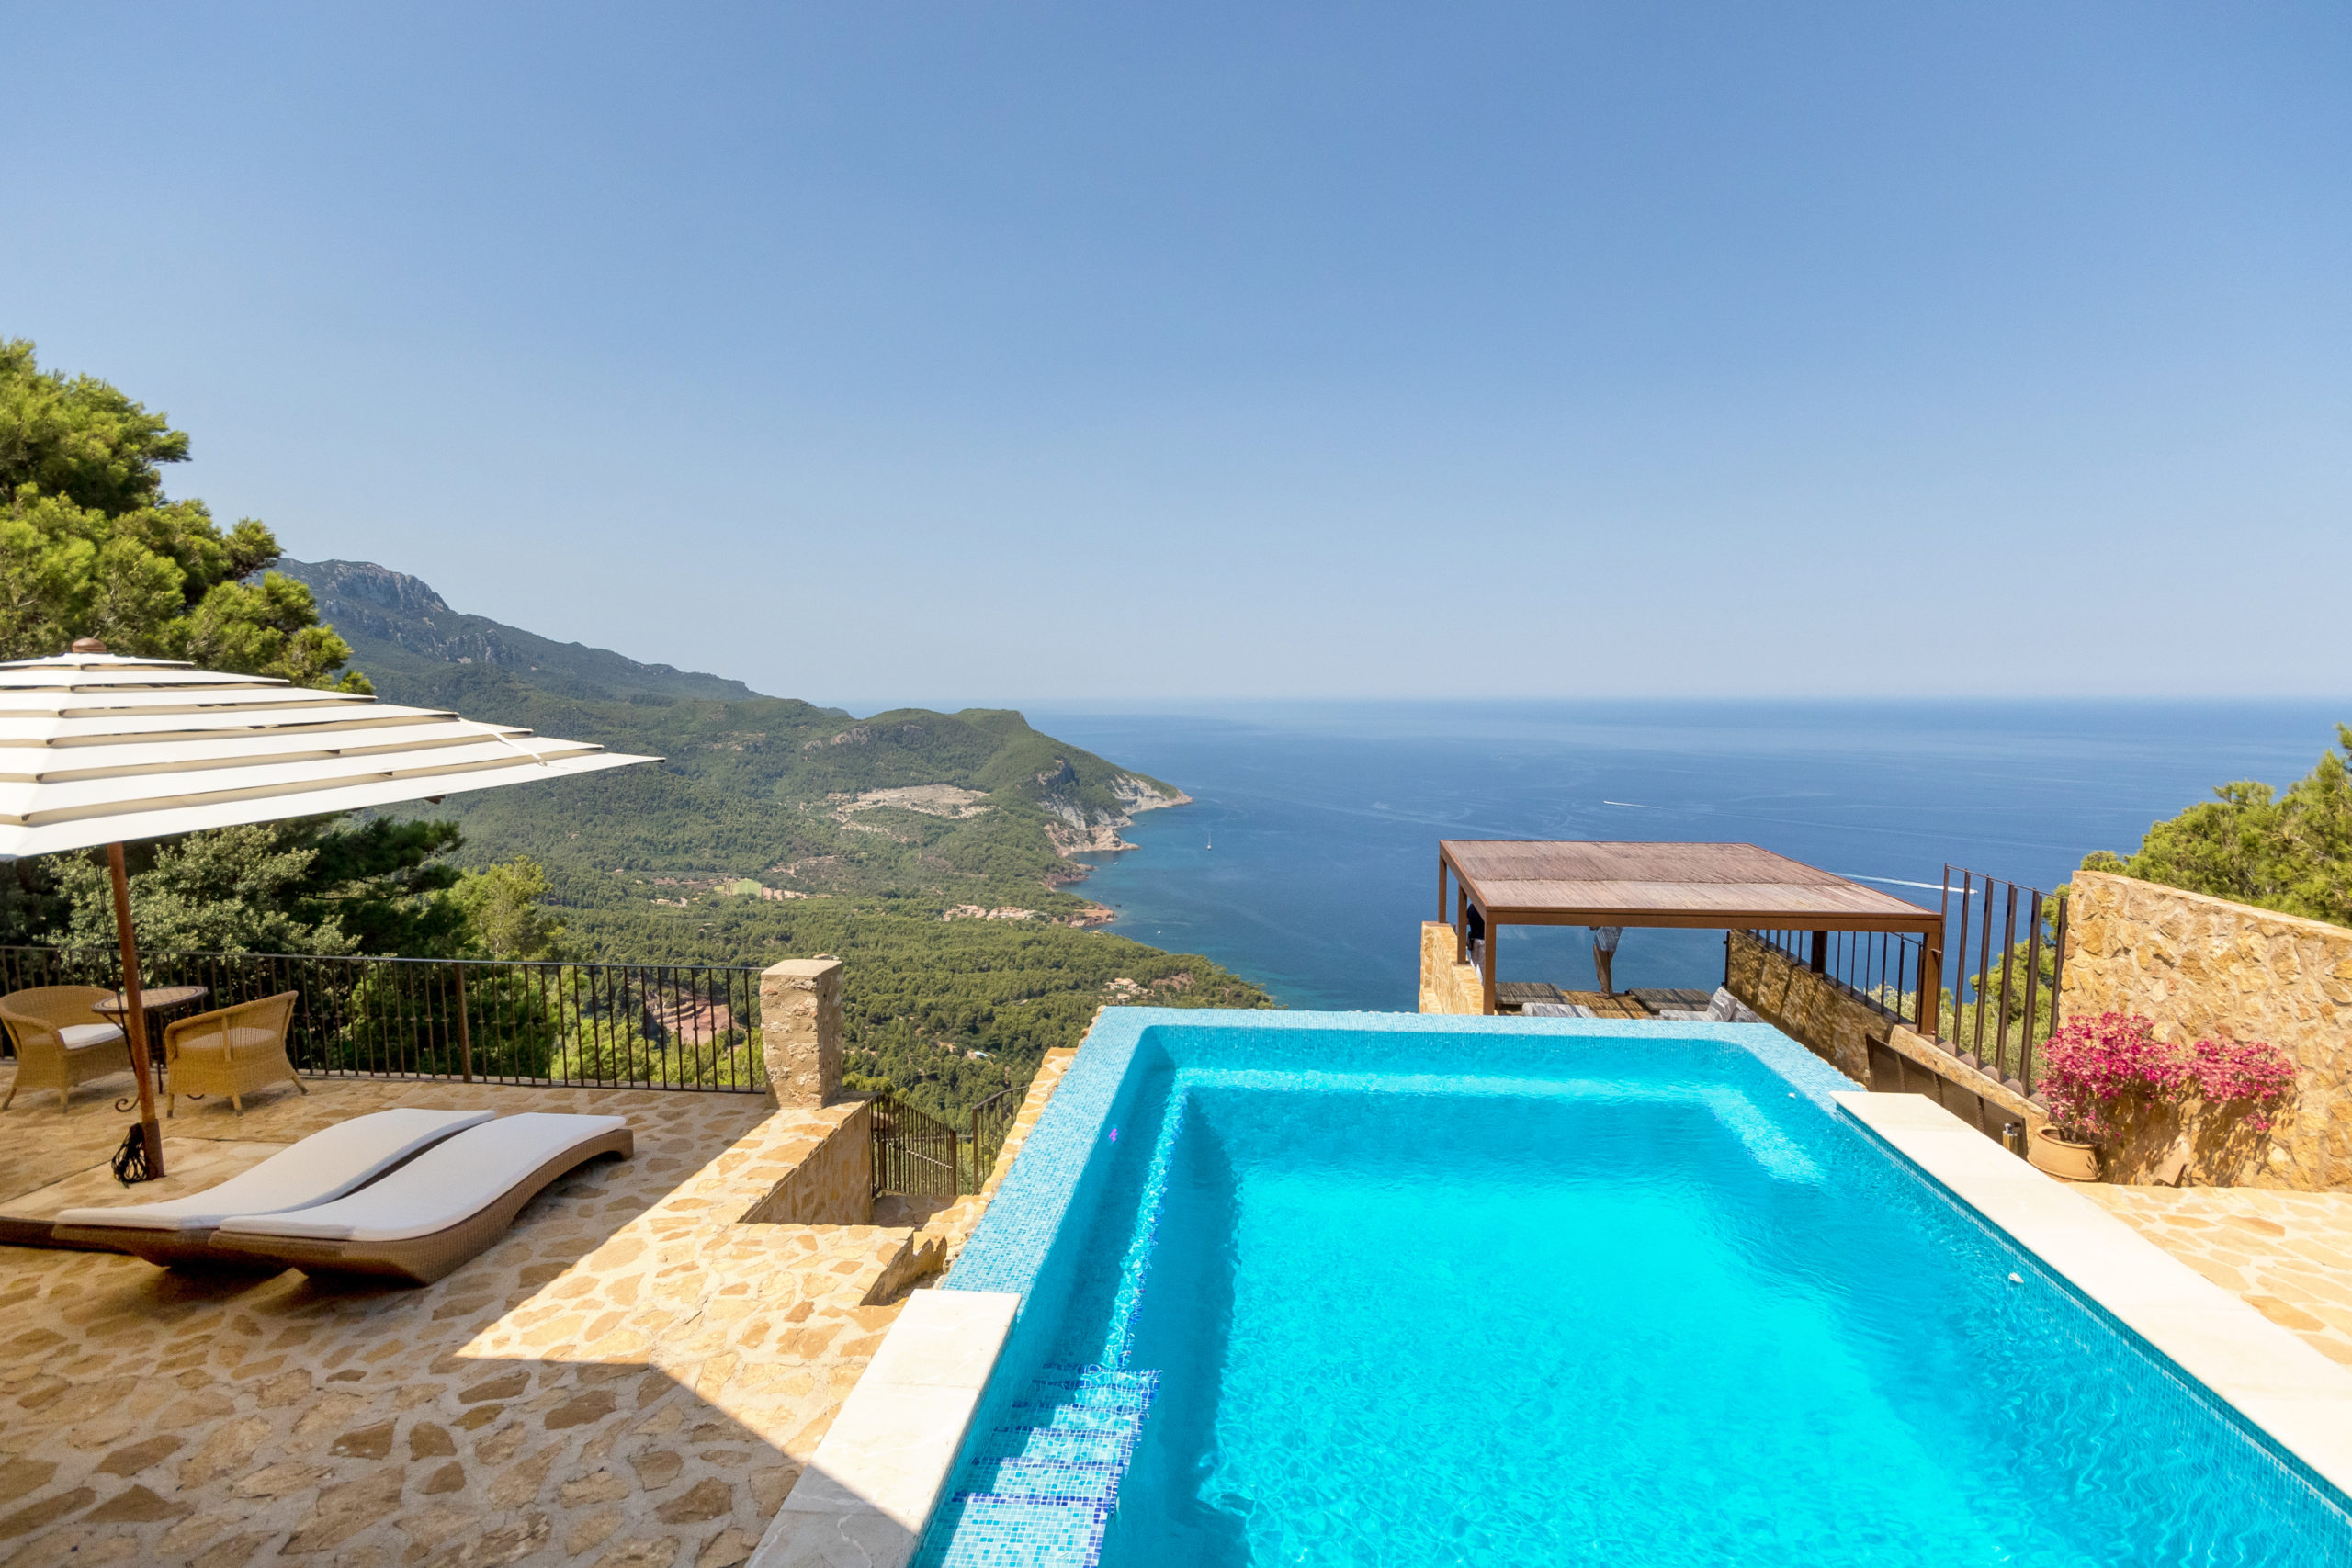 A first-class sea view is paid significantly higher. And properties with a pool are also more expensive than properties without.